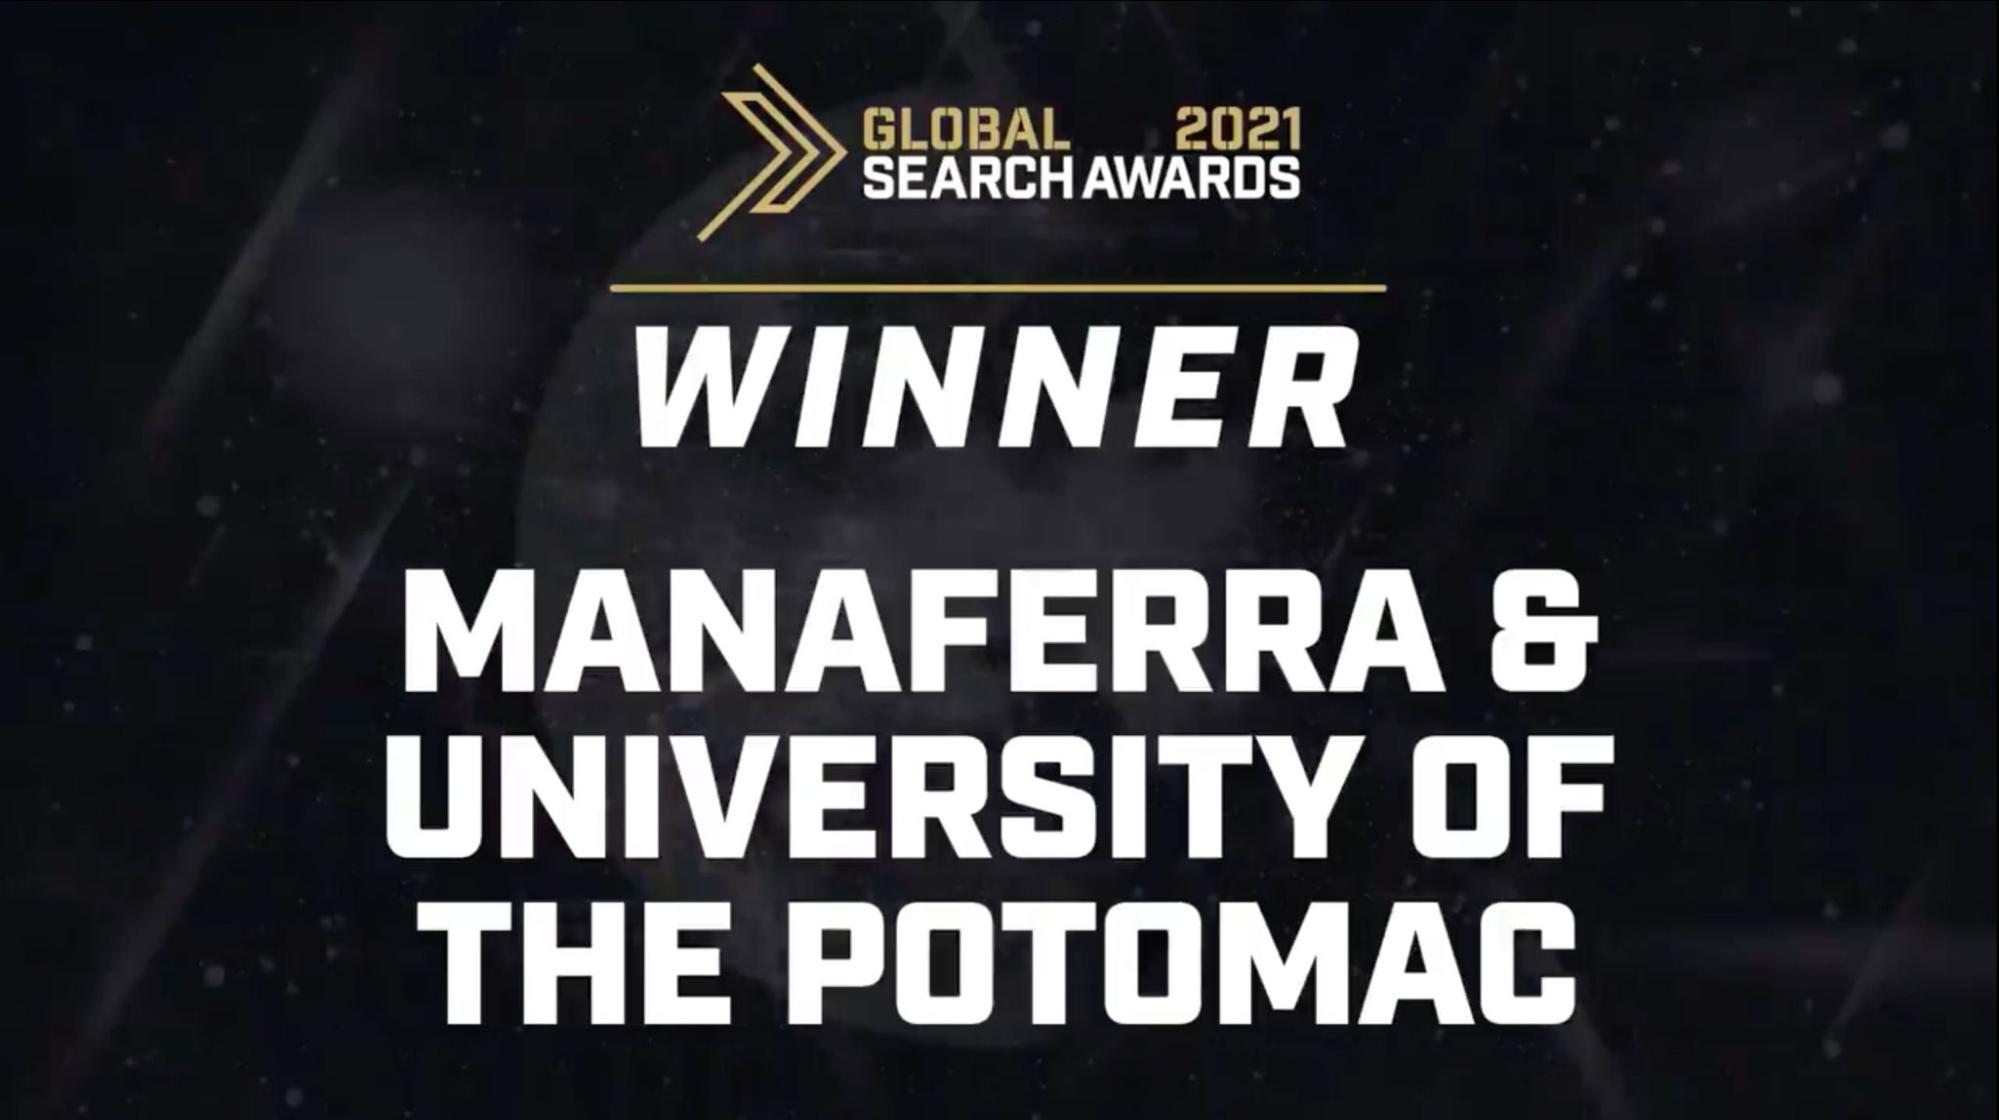 Manaferra Wins “Best Use of Search” award at Global Search Awards